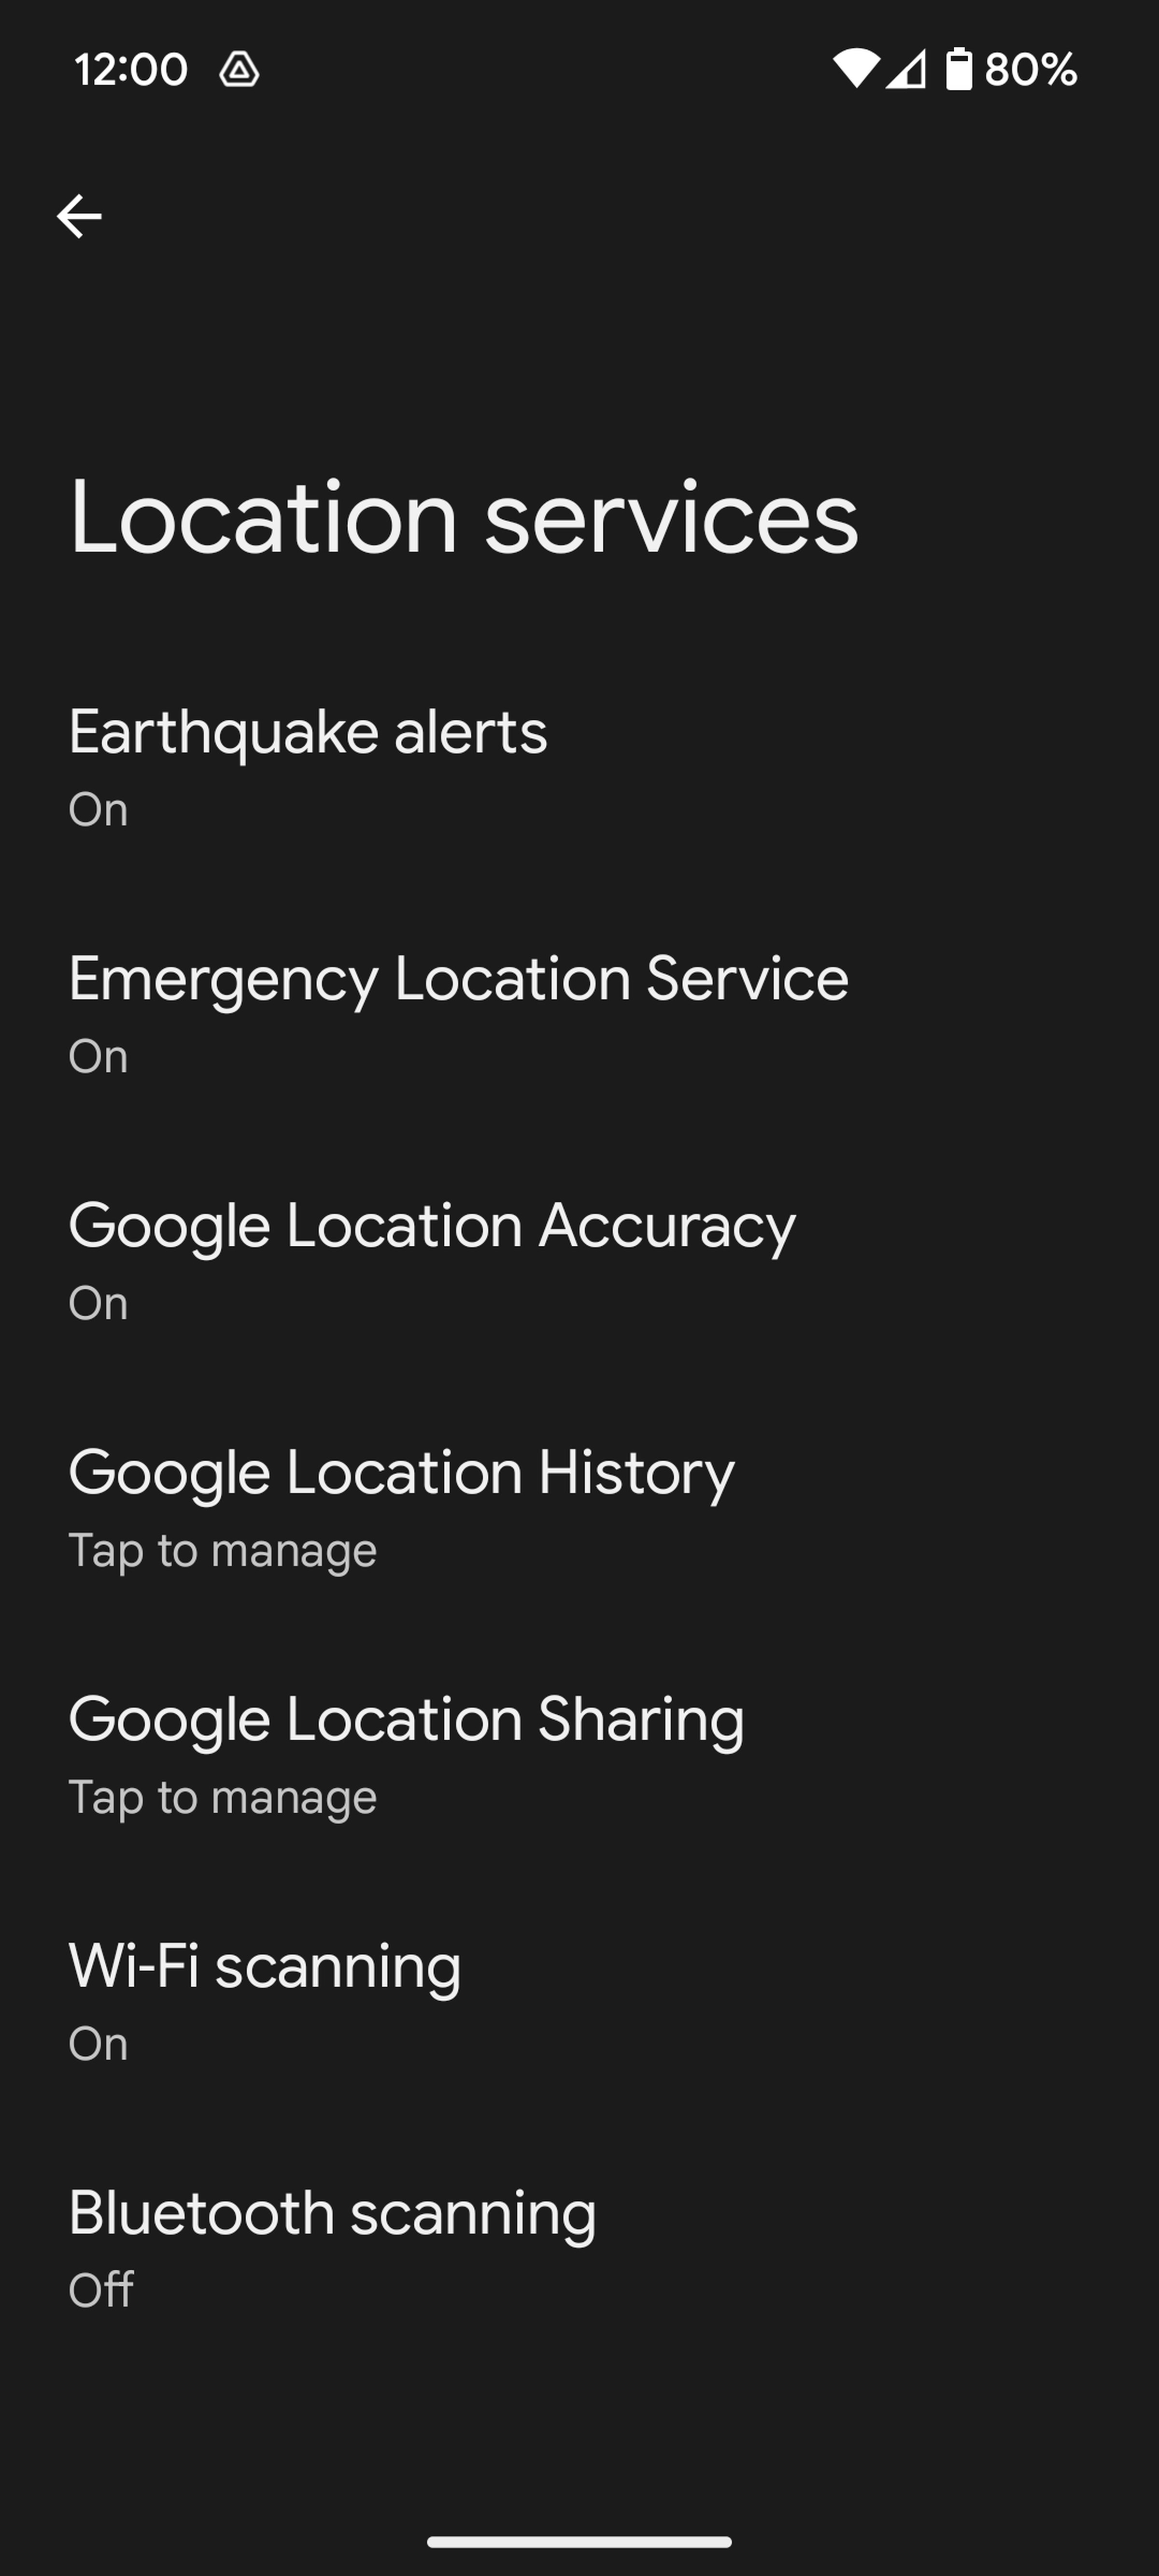 Location services mobile page with a list of different location-based services below.